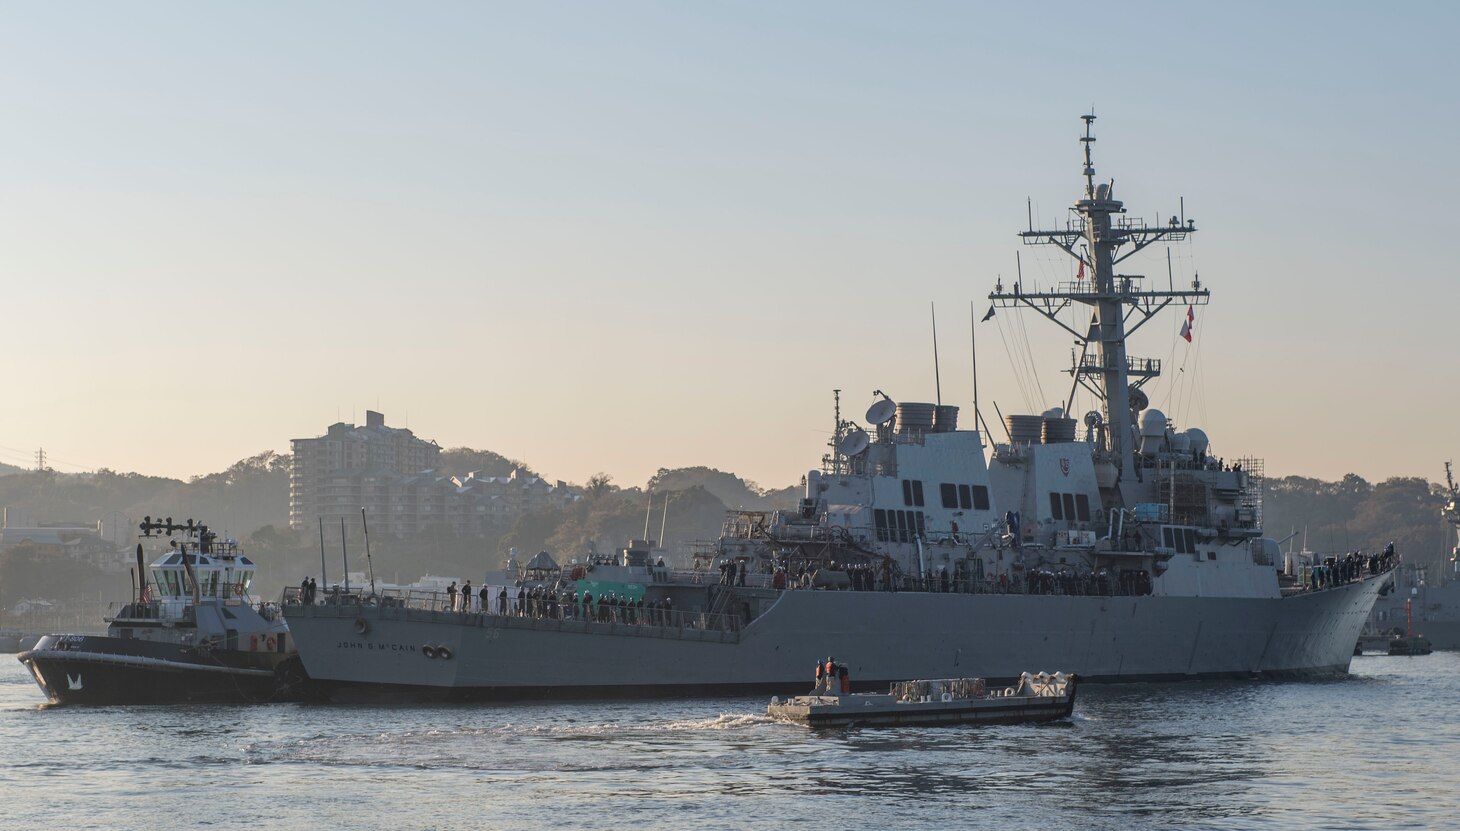 YOKOSUKA, Japan (Nov. 27, 2018) The Arleigh Burke-class guided missile destroyer USS John S. McCain (DDG 56) is pulled towards a pier after departing from a dry dock at Fleet Activities Yokosuka. McCain is departing the dock after an extensive maintenance period in order to sustain the ship's ability to serve as a forward-deployed asset in the U.S. 7th Fleet area of operations. (U.S. Navy Photo by Mass Communication Specialist 2nd Class Jeremy Graham)